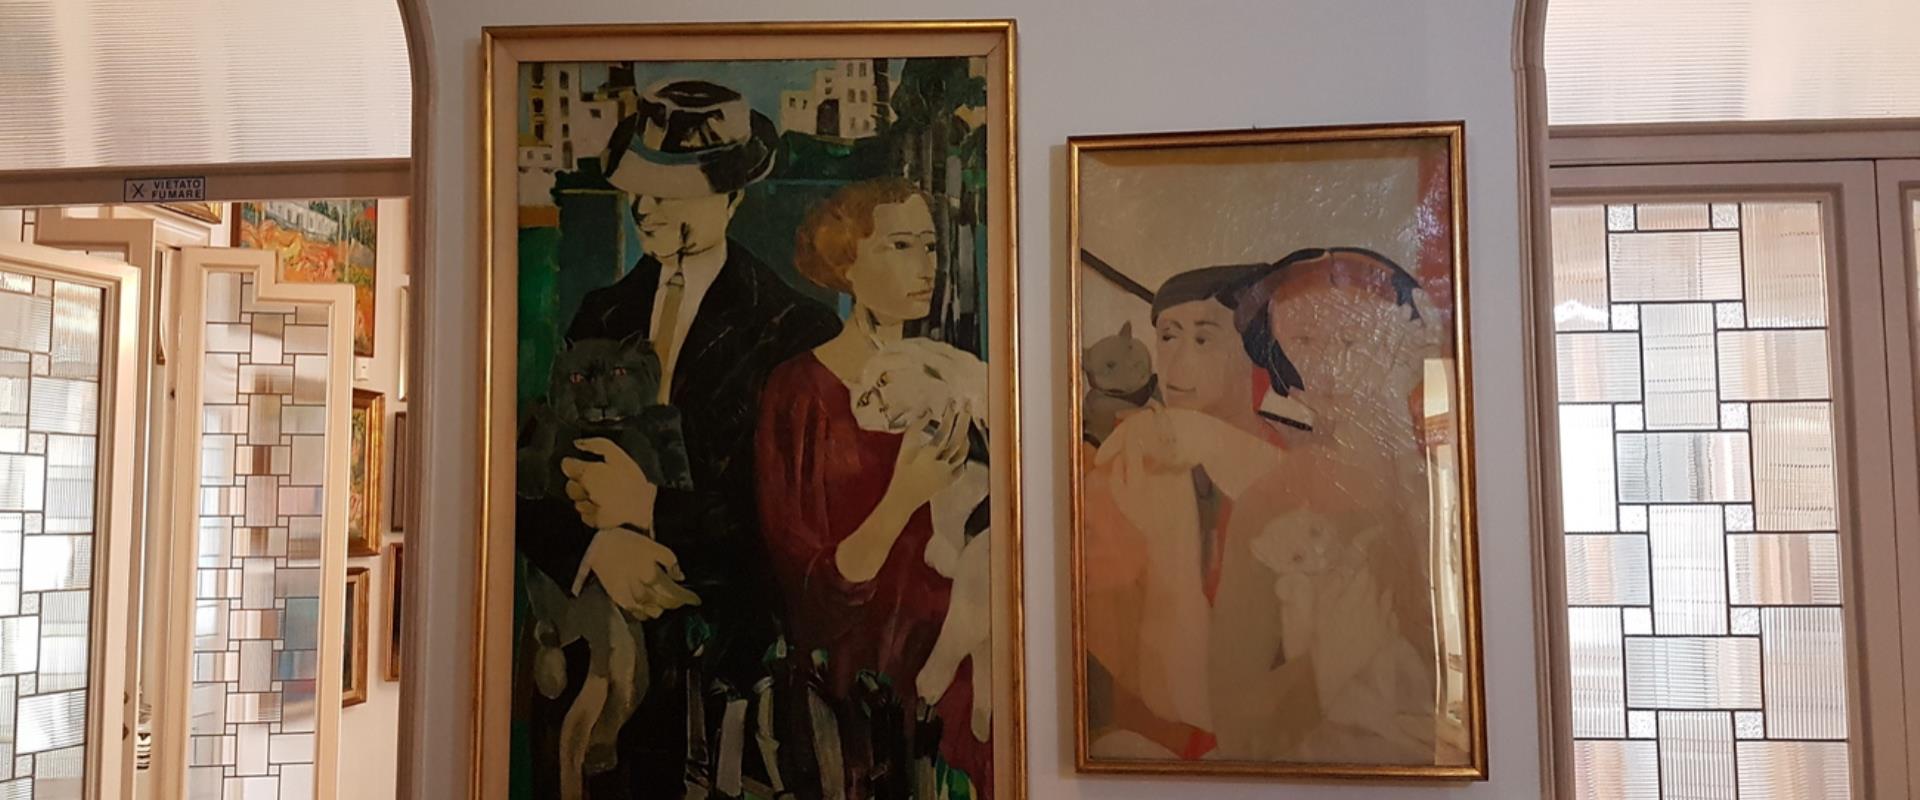 Stay at the Best Western Hotel City and visit, a few minutes walk, the Casa Museo Boschi di Stefano, a residence-museum that houses more than three hundred works of art of the twentieth century collected by the spouses Antonio Boschi and Marieda di Stefano.